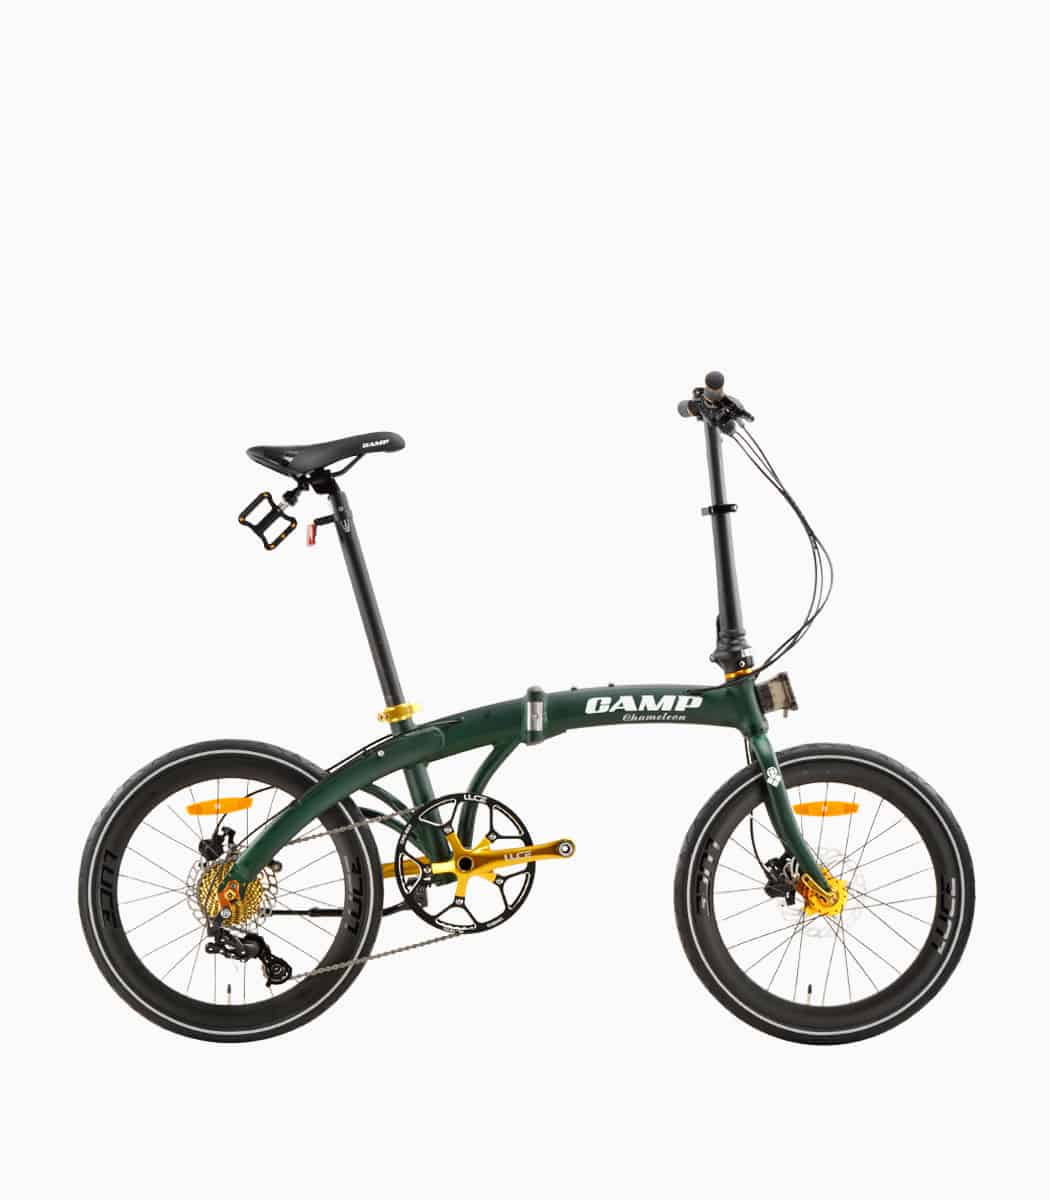 CAMP Chameleon (MATT GREEN) foldable bicycle with reflective tyres right